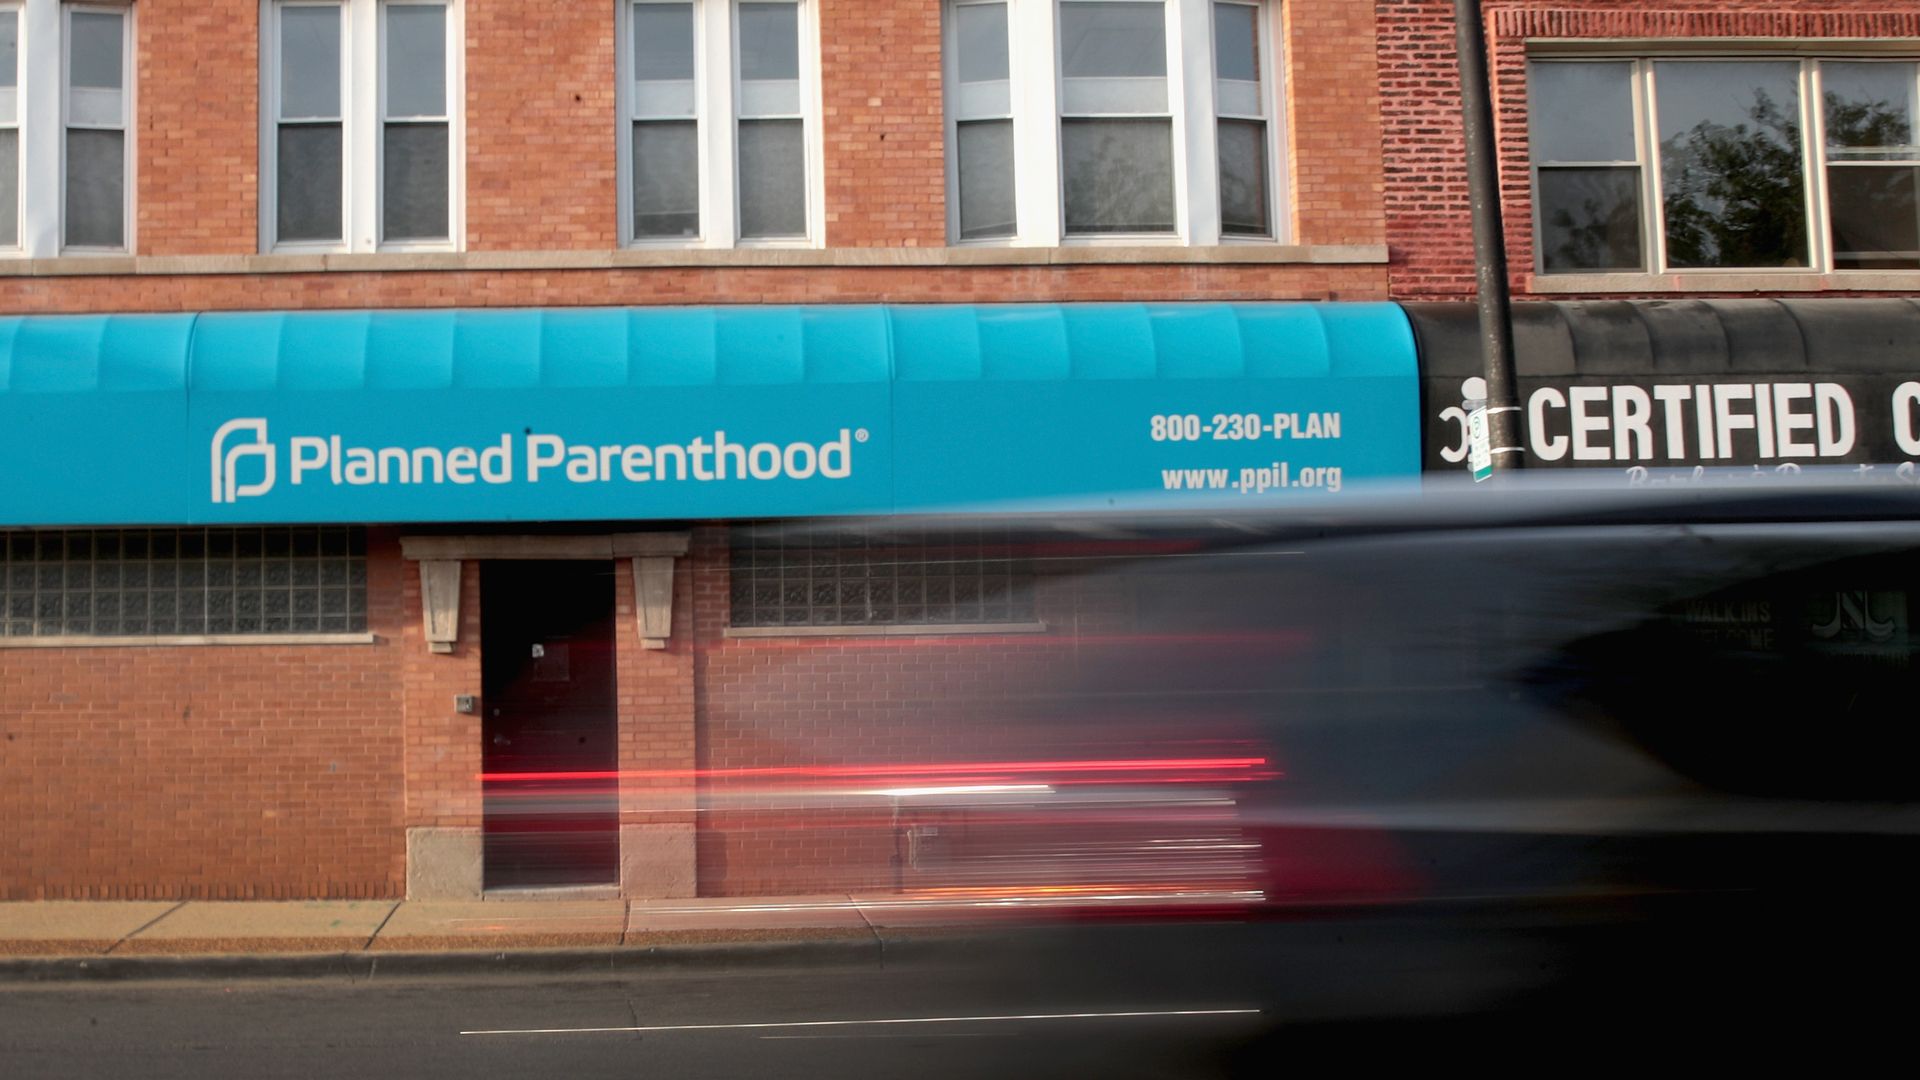 Photo of a faced of a building that says "Planned Parenthood" 